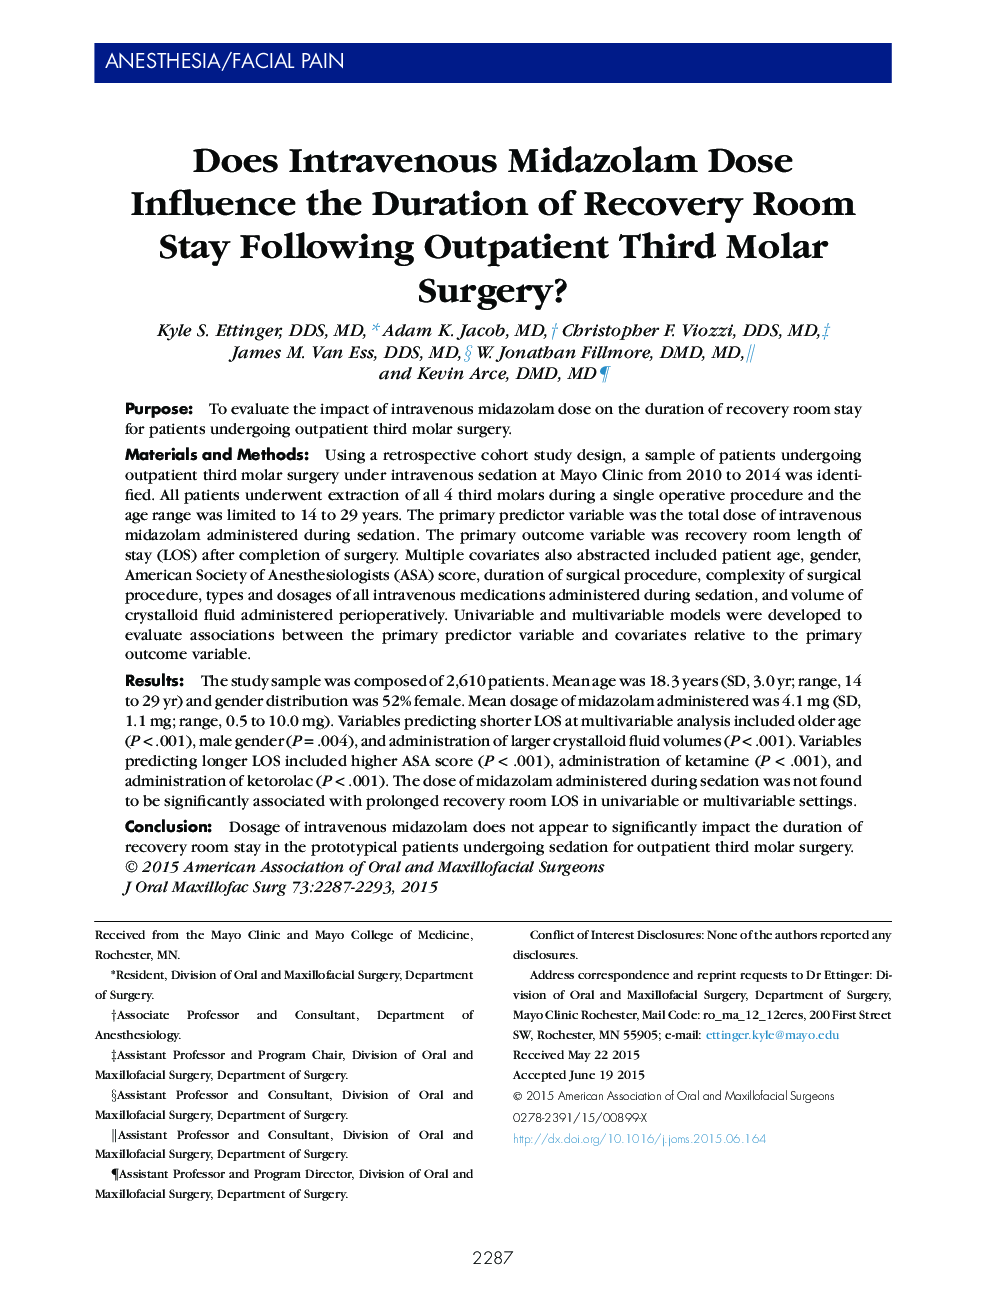 Does Intravenous Midazolam Dose Influence the Duration of Recovery Room Stay Following Outpatient Third Molar Surgery? 